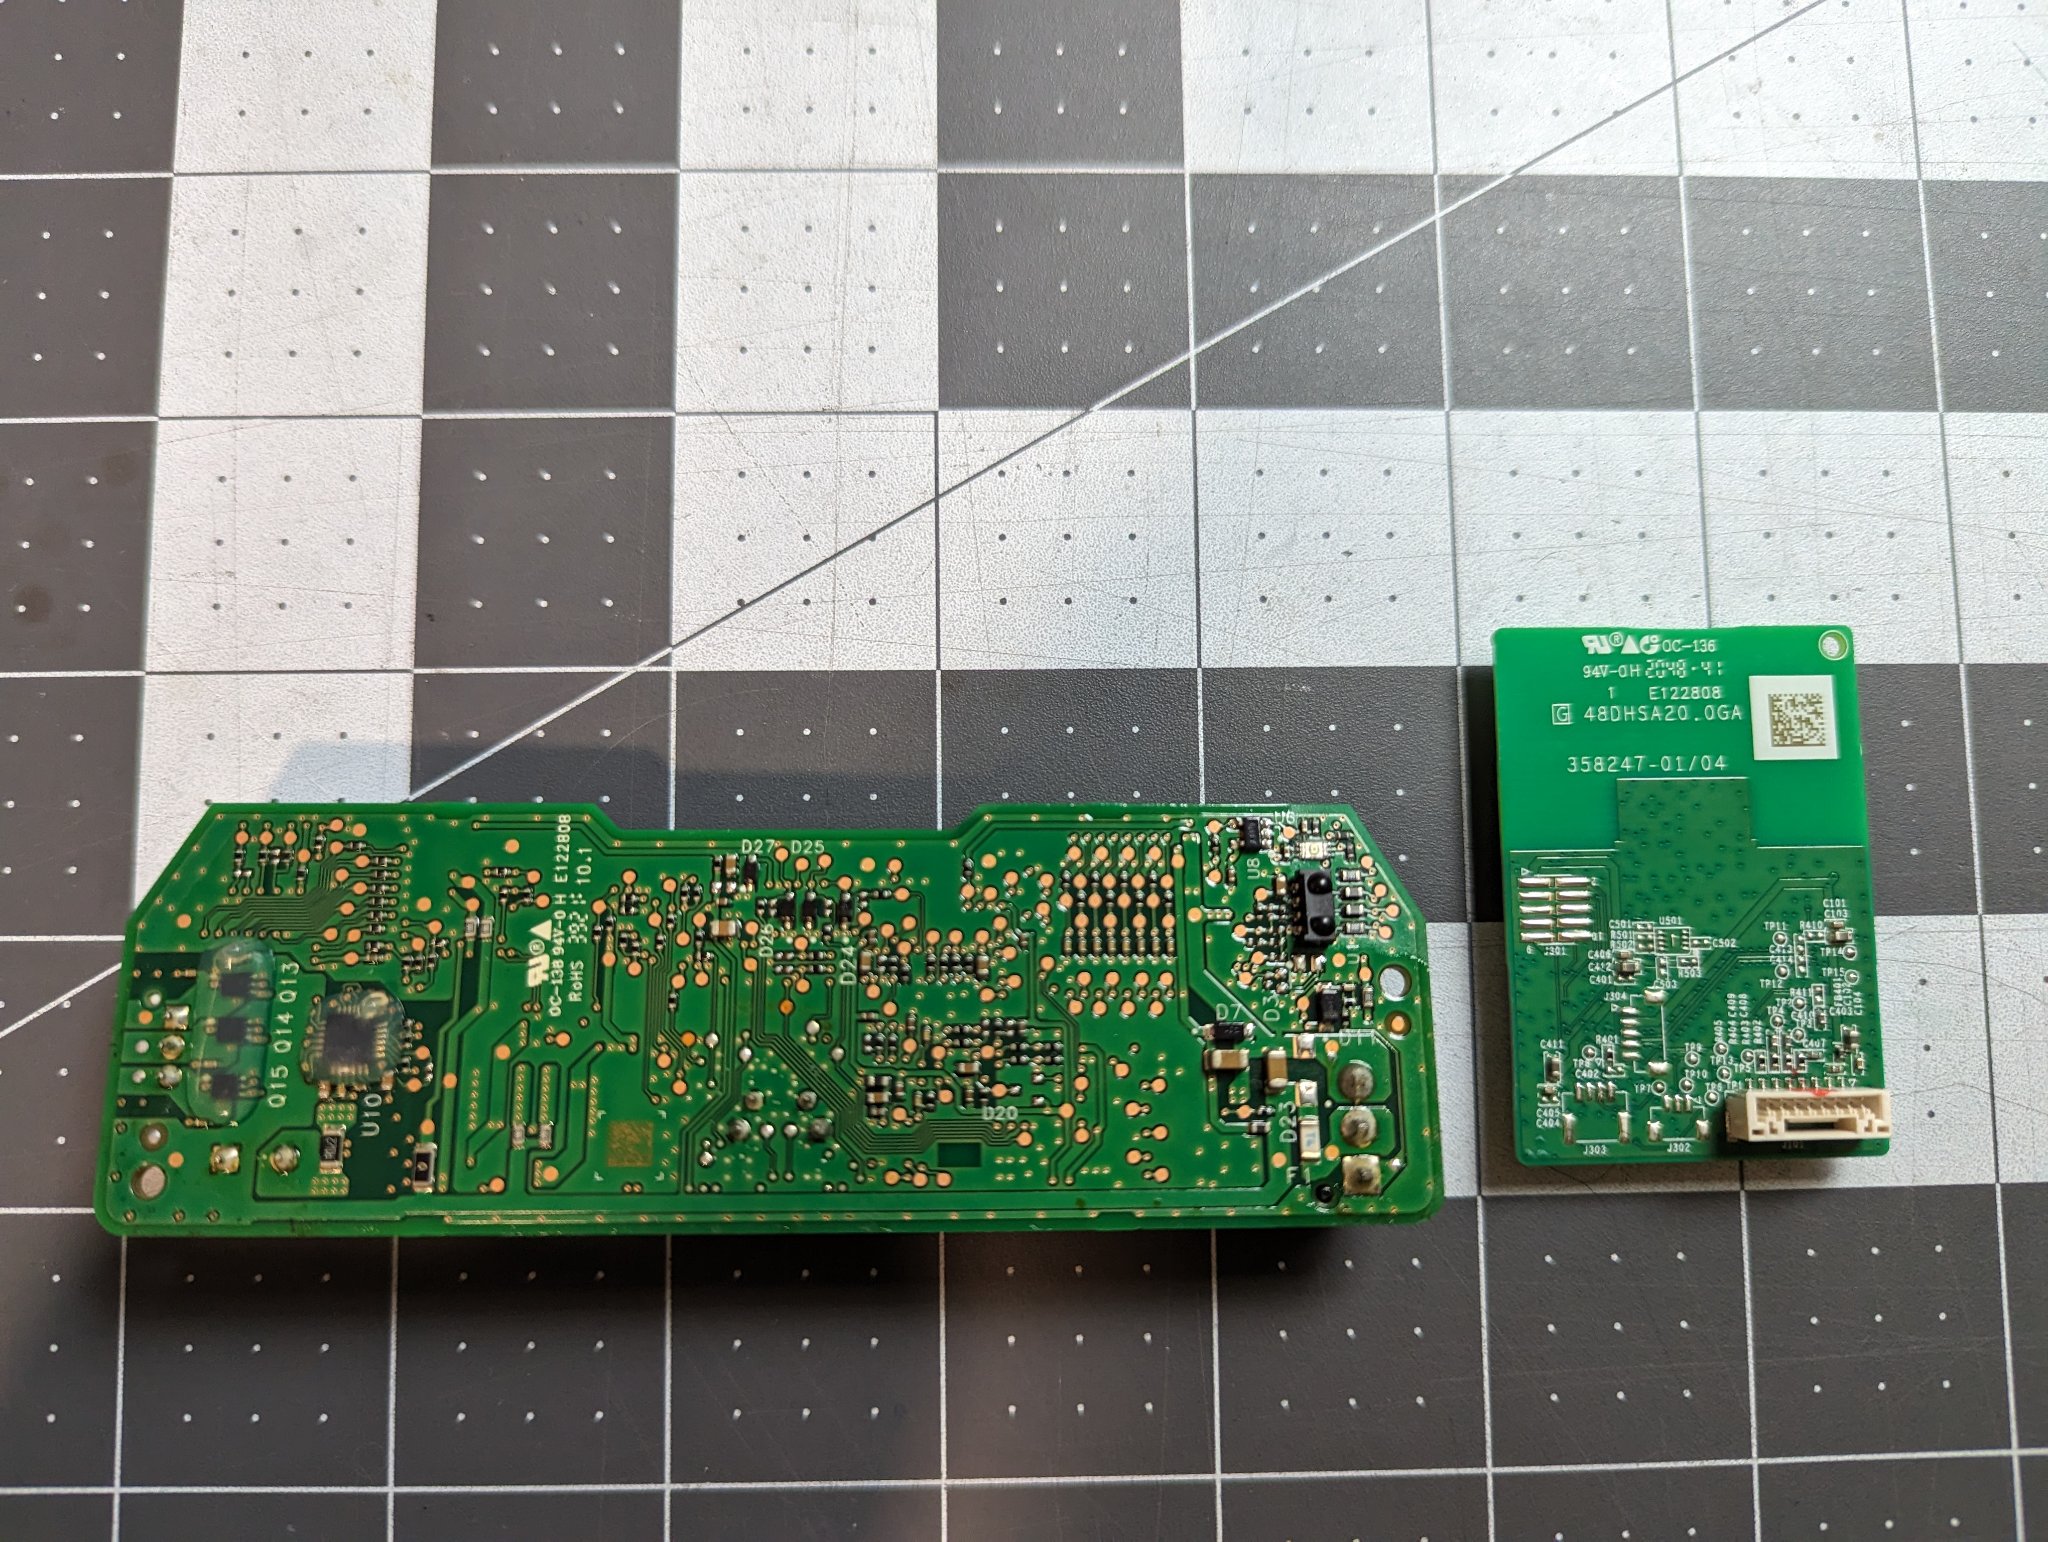 Back of the main board and wifi module